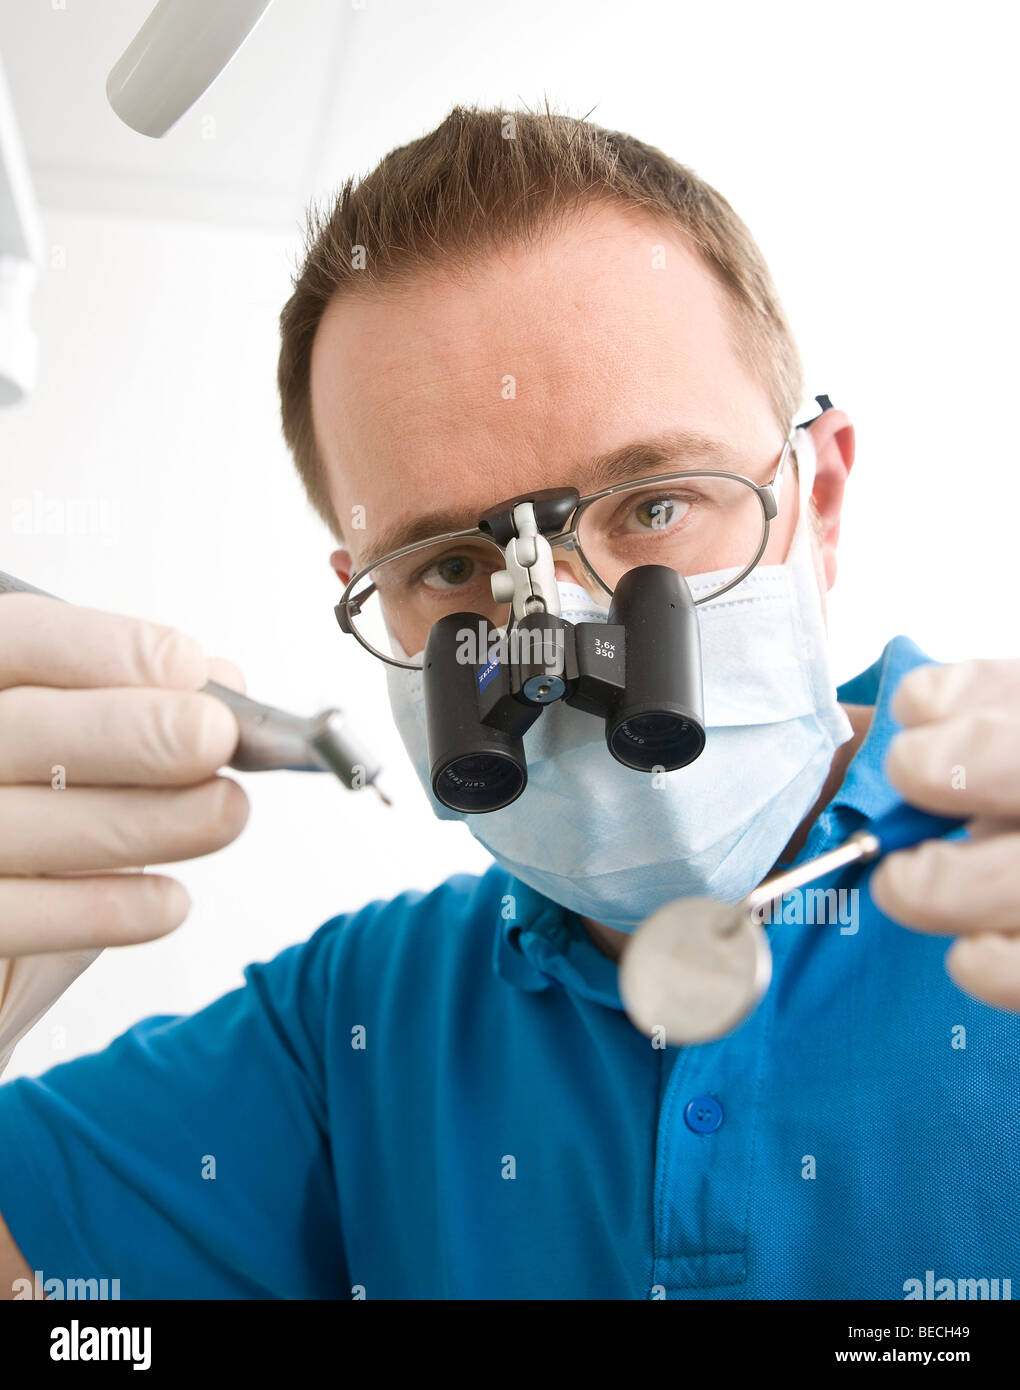 Dentist wearing magnifying glasses during treatment Stock Photo